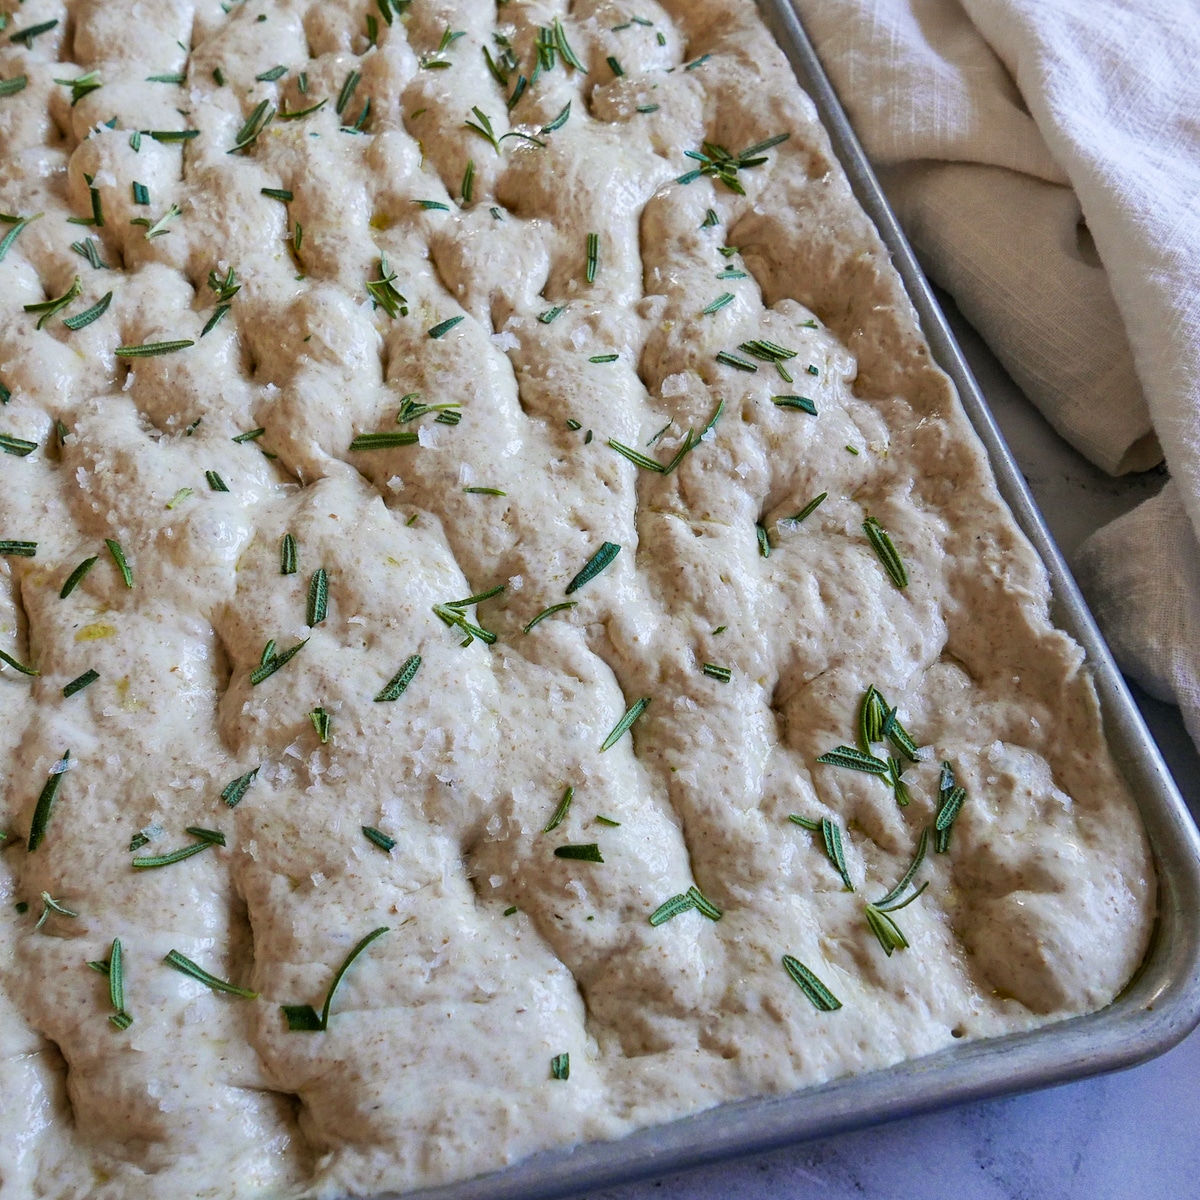 Dimpled focaccia dough sprinkled with rosemary and sea salt in a baking sheet.